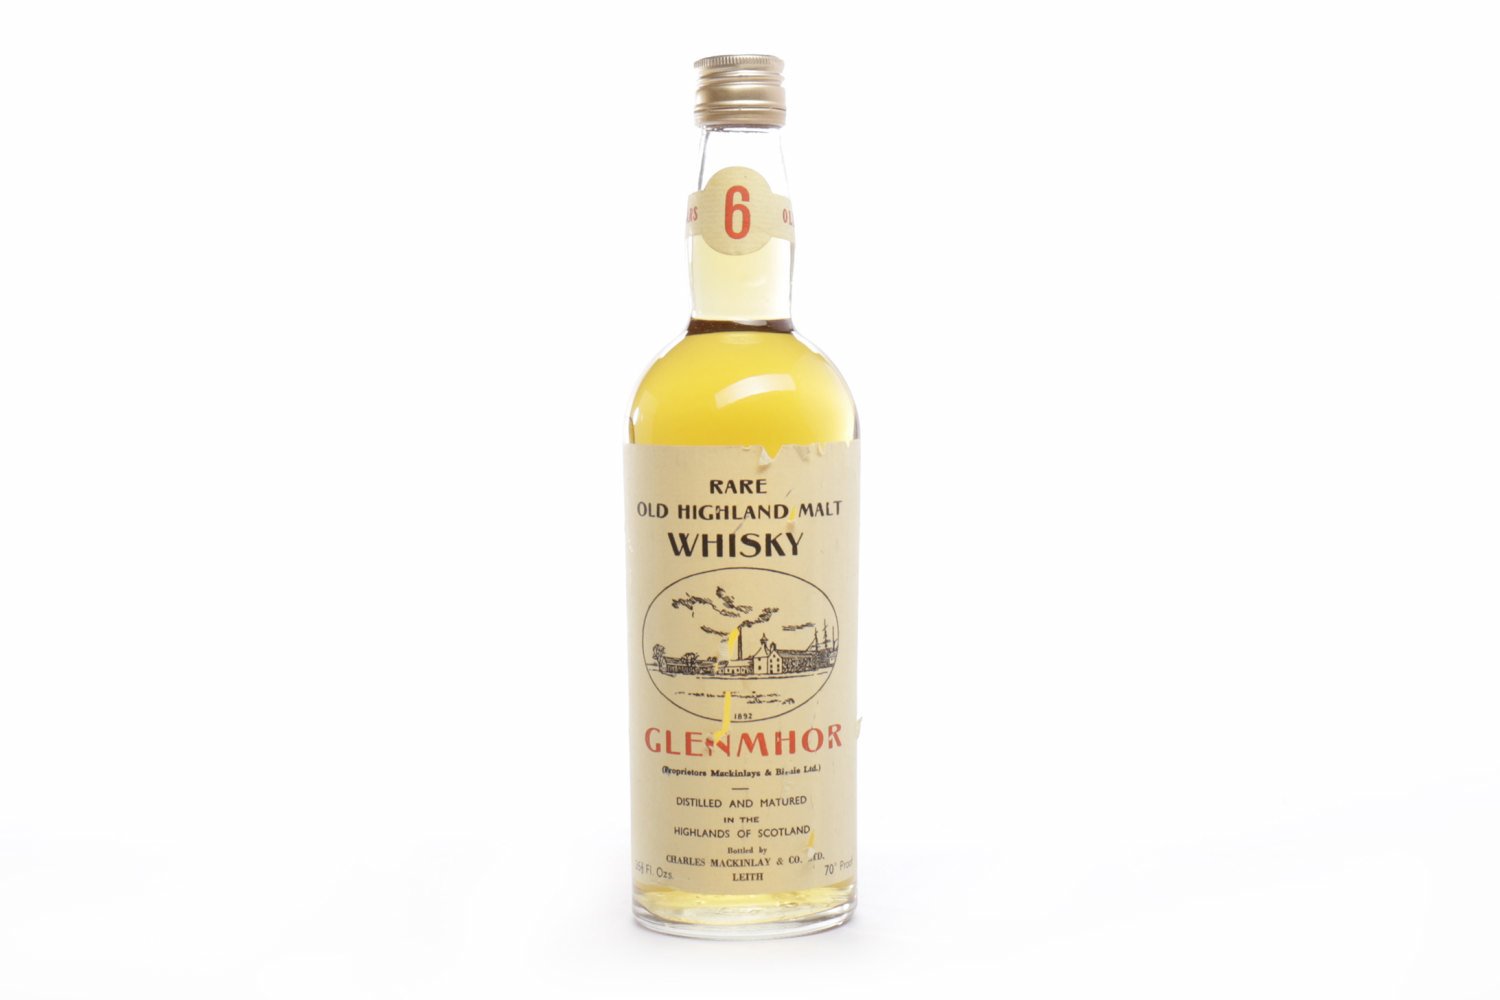 GLEN MHOR 6 YEARS OLD Closed 1983. Muirton, Inverness-shire. Bottled by Charles Mackinlay & Co, Ltd.